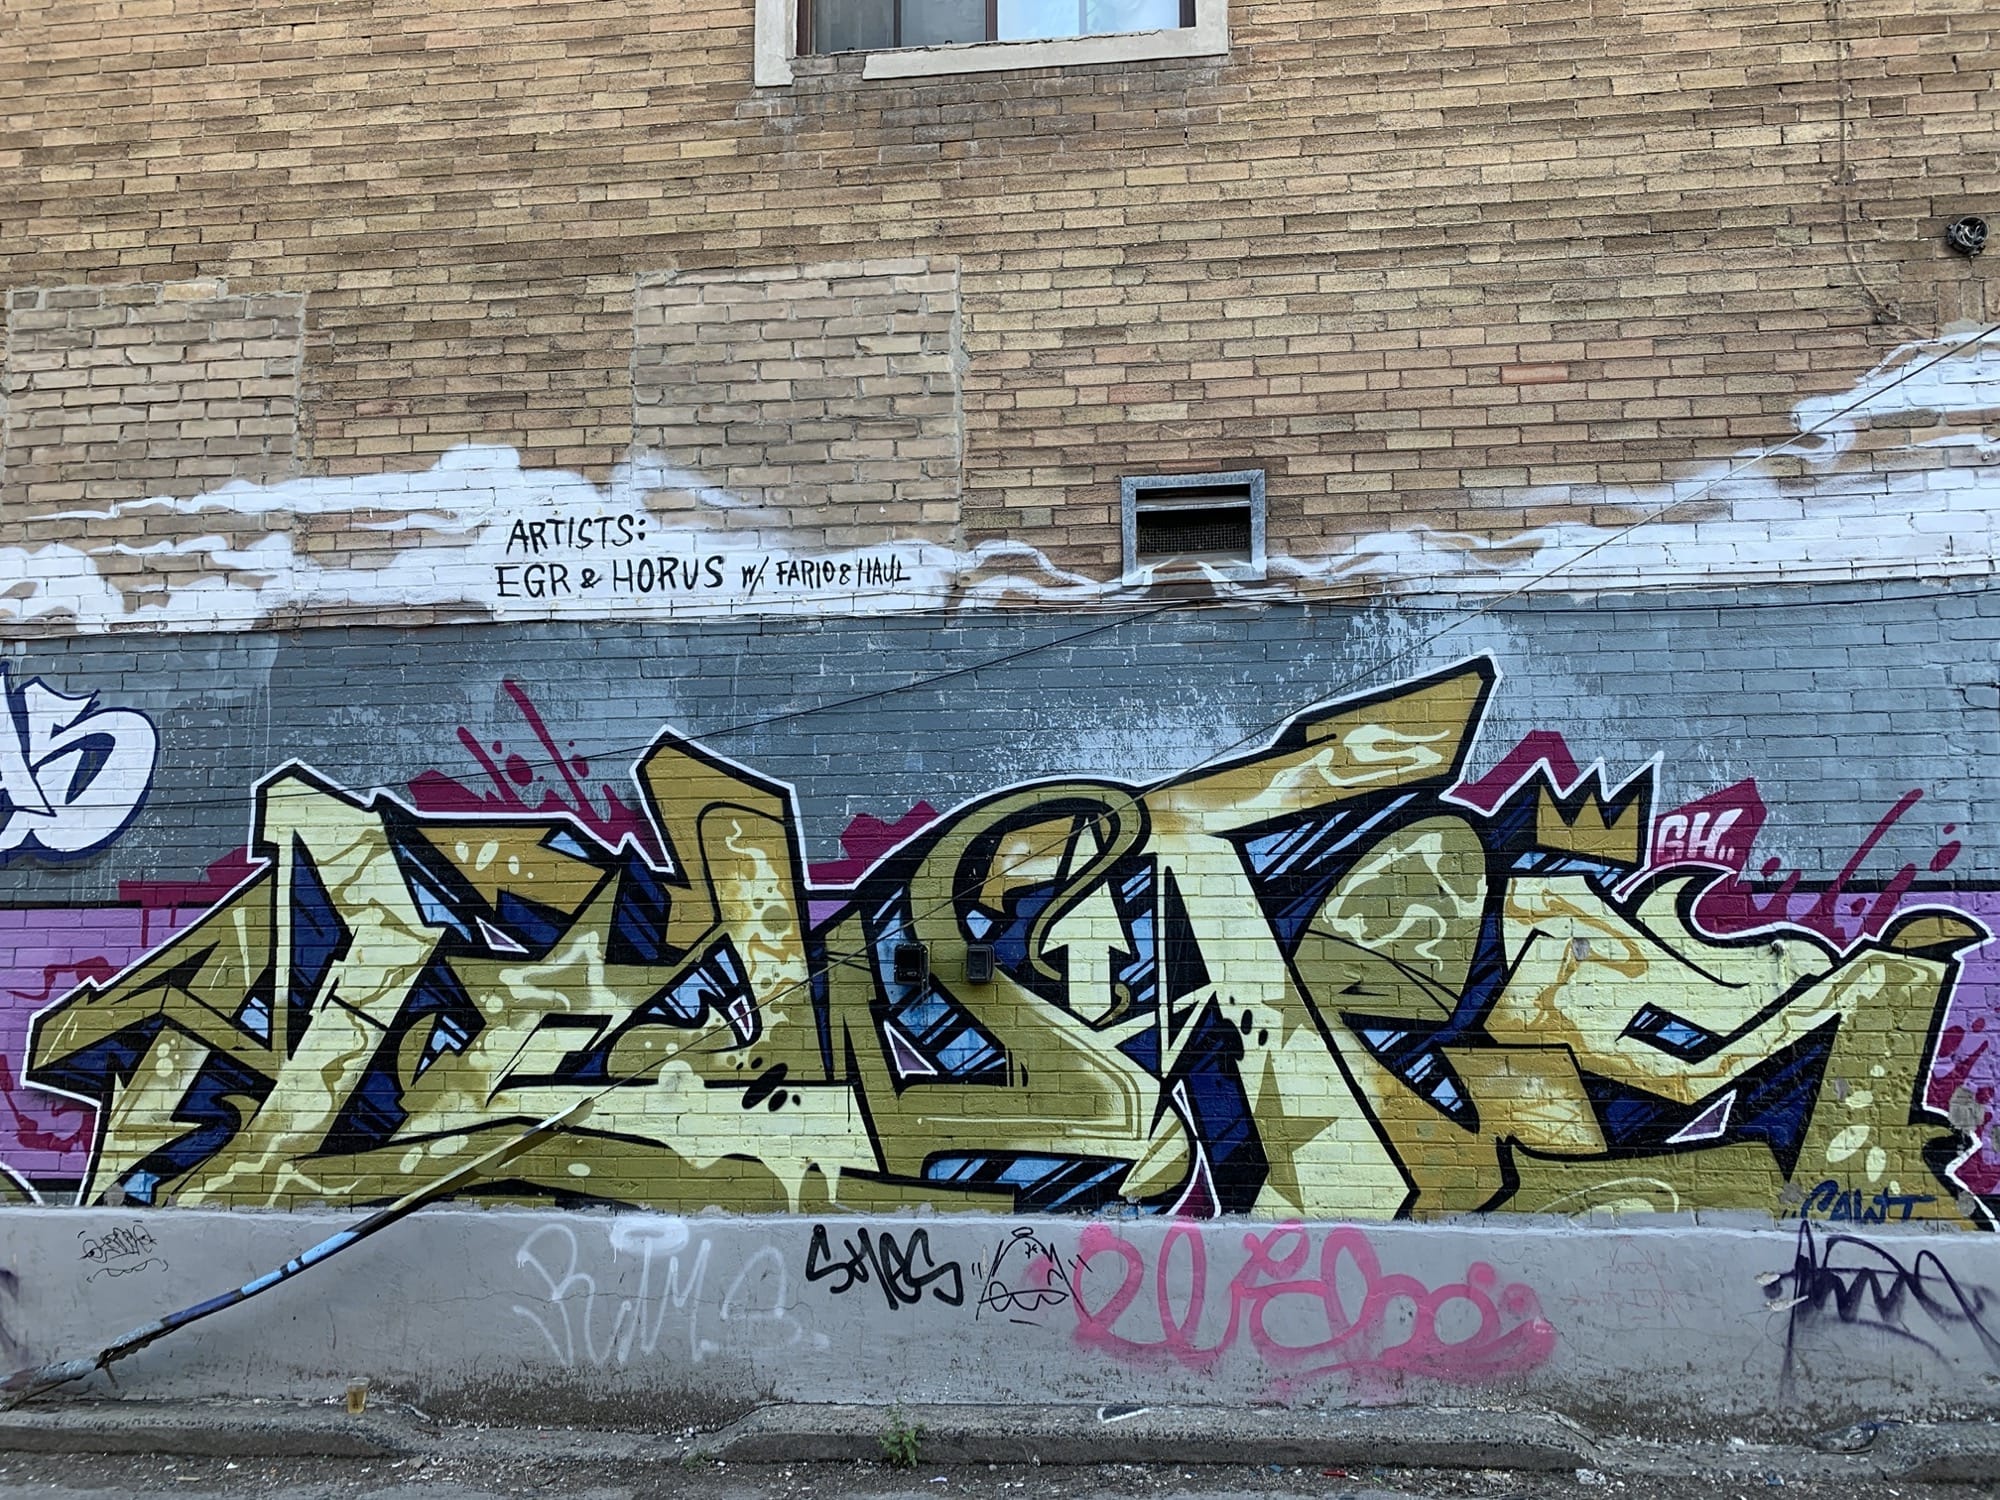 Graffiti 2377  captured by Rabot in Toronto Canada